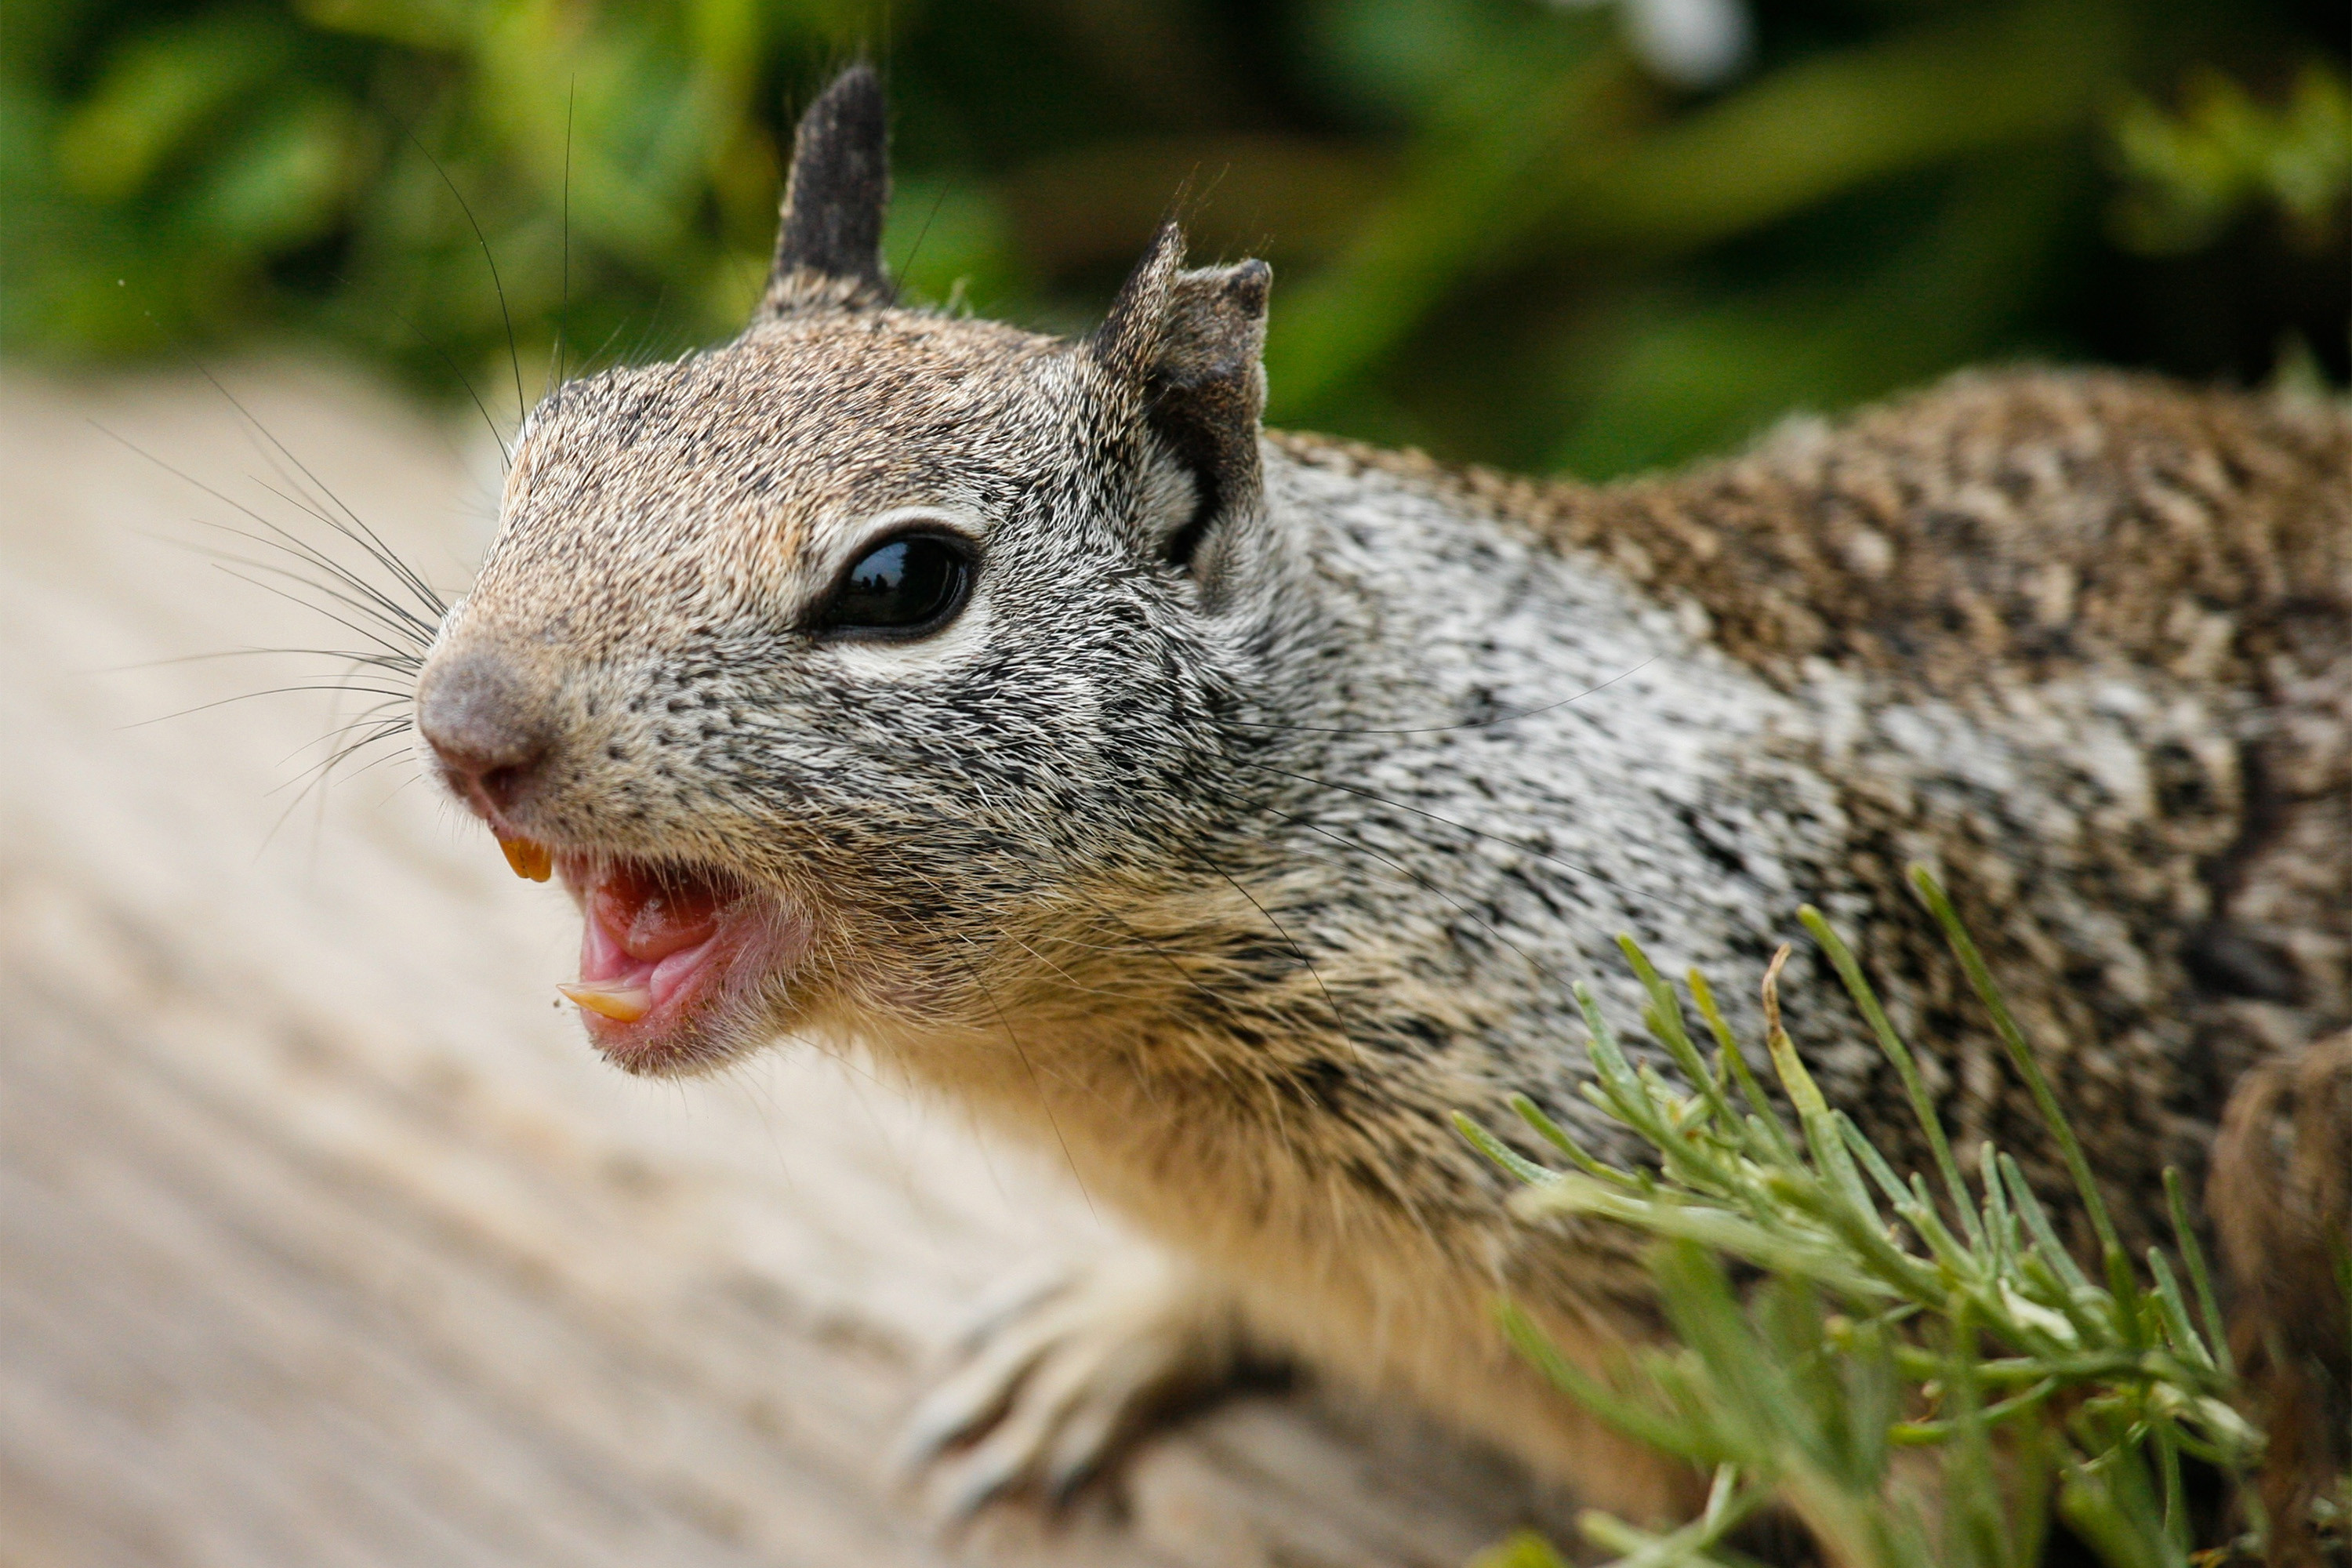 New Yorkers aren't afraid with psycho squirrel on the loose